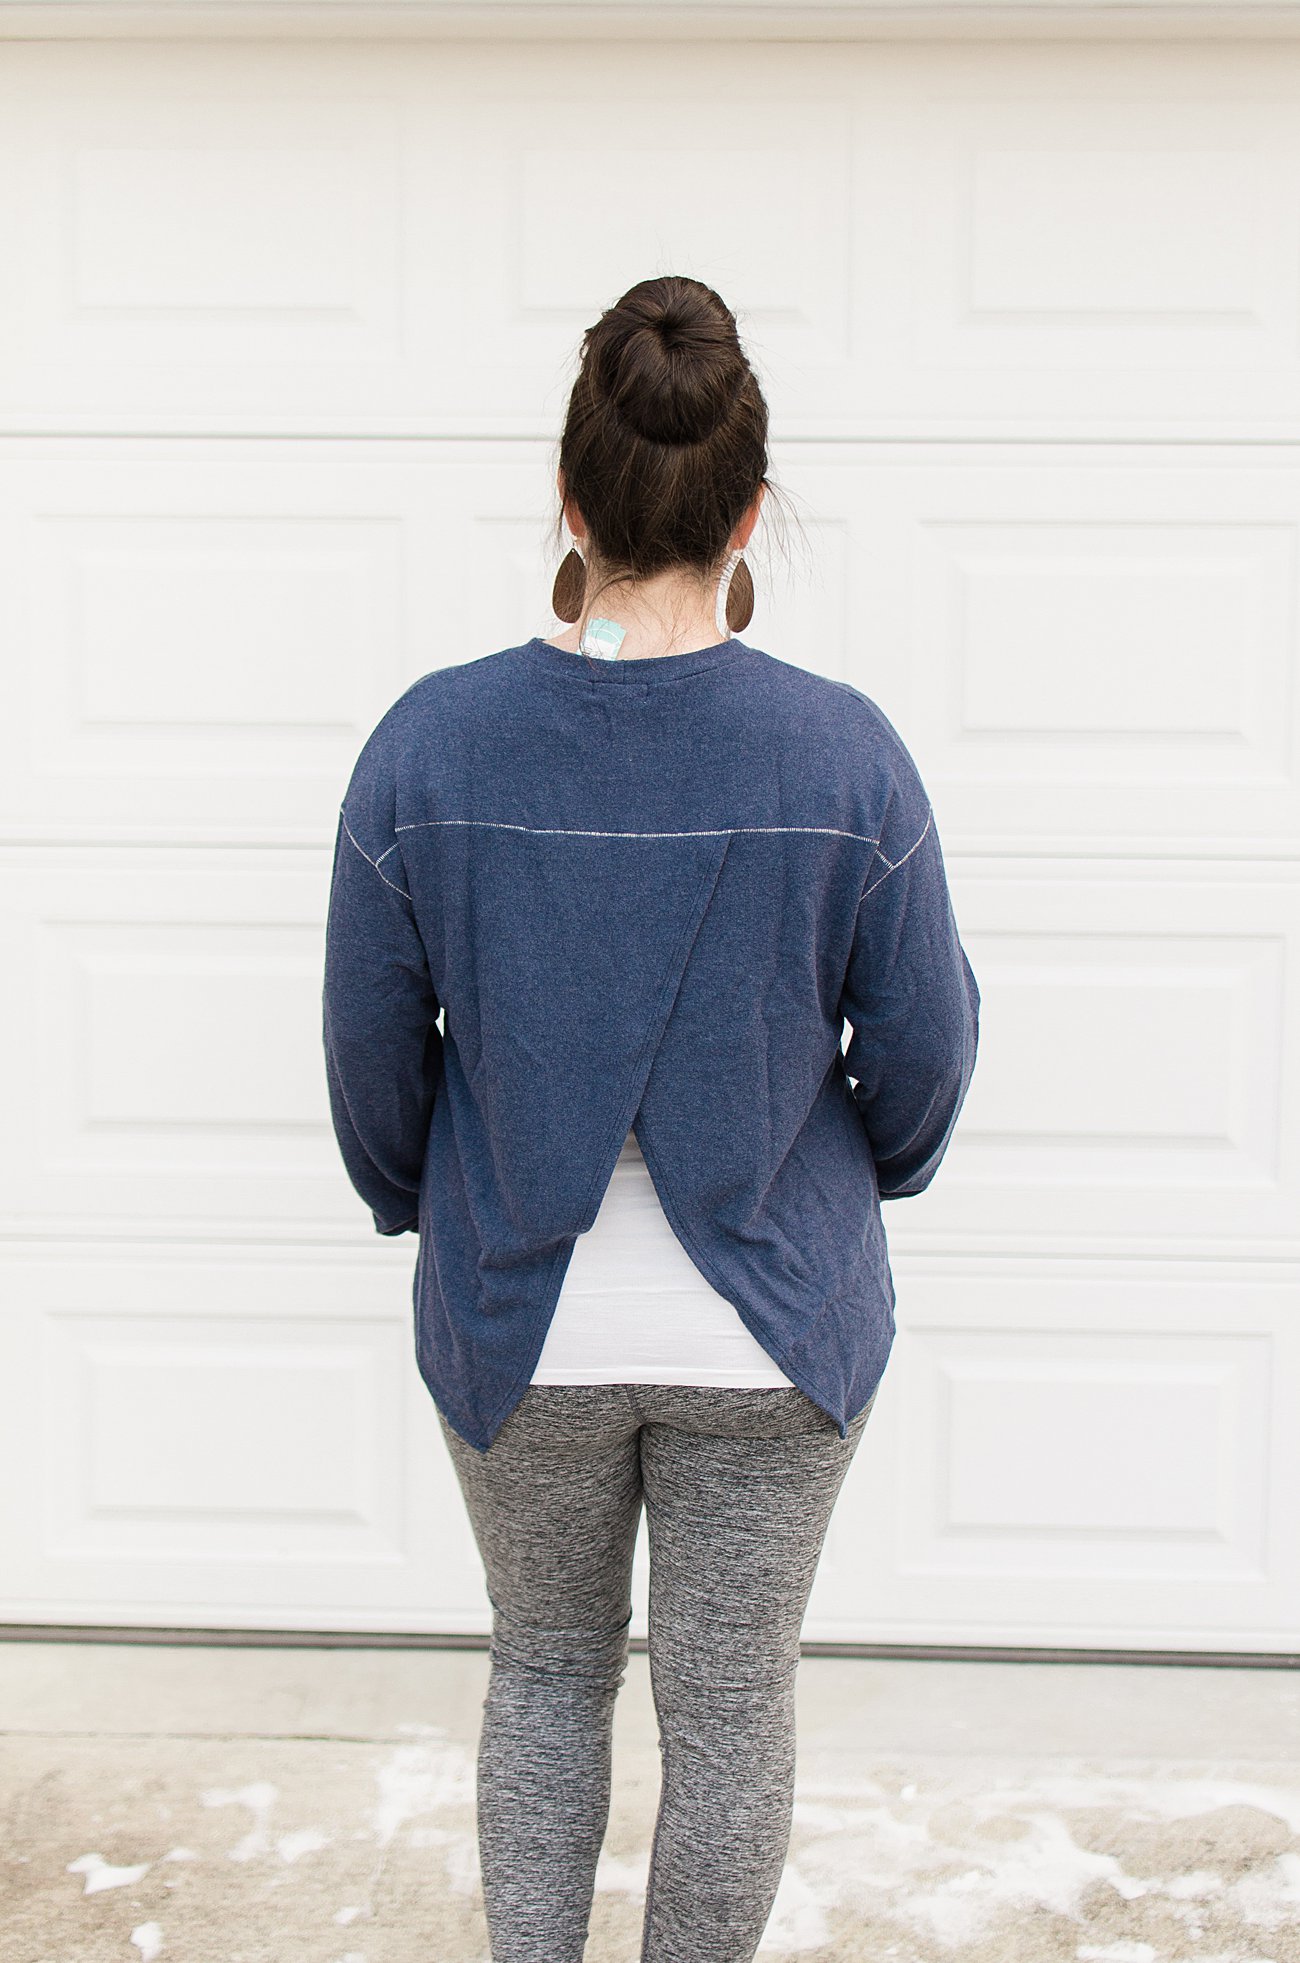 Stitch Fix LNA - Victoria Crossback Knit Top - SIZE: L - $121 (Made in the USA) - My 50th Fix & 5 Tips for Developing a Relationship with Your Stitch Fix Stylist by popular North Carolina ethical fashion blogger Still Being Molly